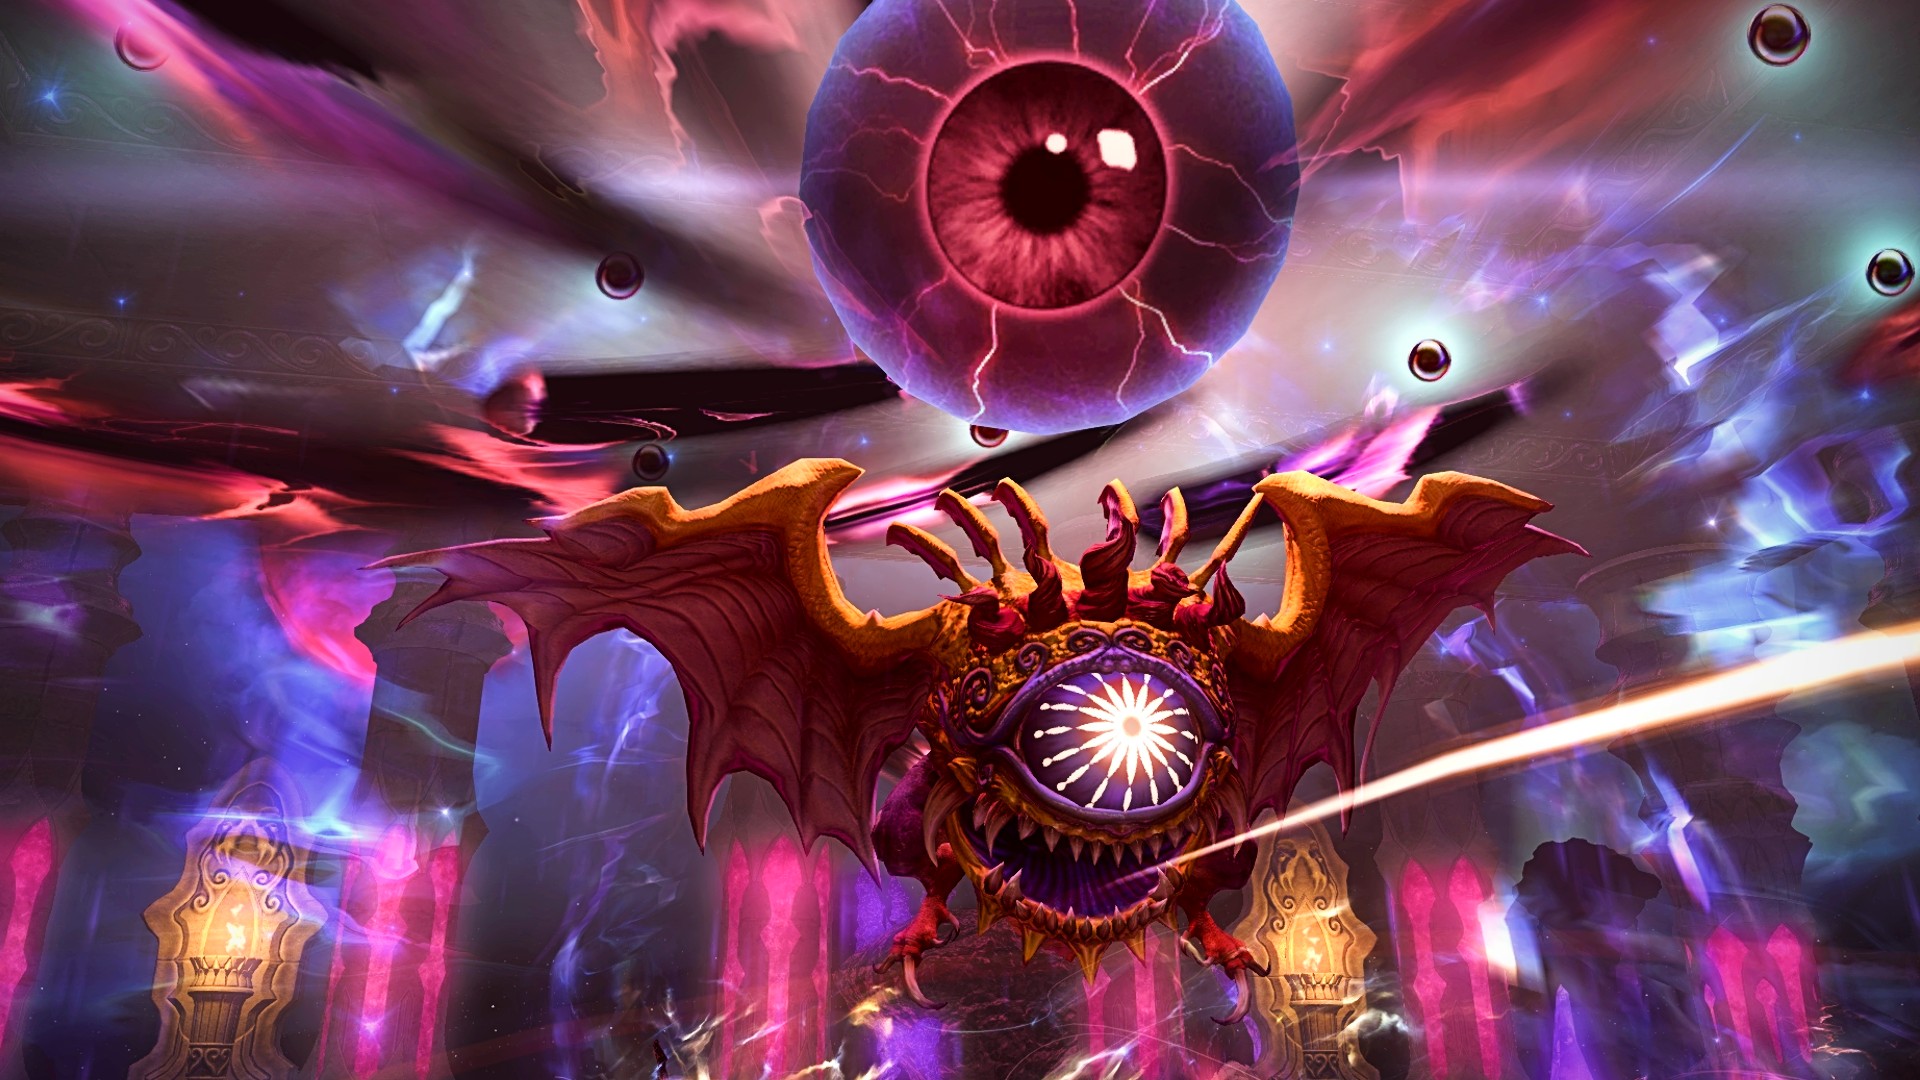 A one-eyed enemy dominates the screen in Final Fantasy 14's Crystal Tower raid